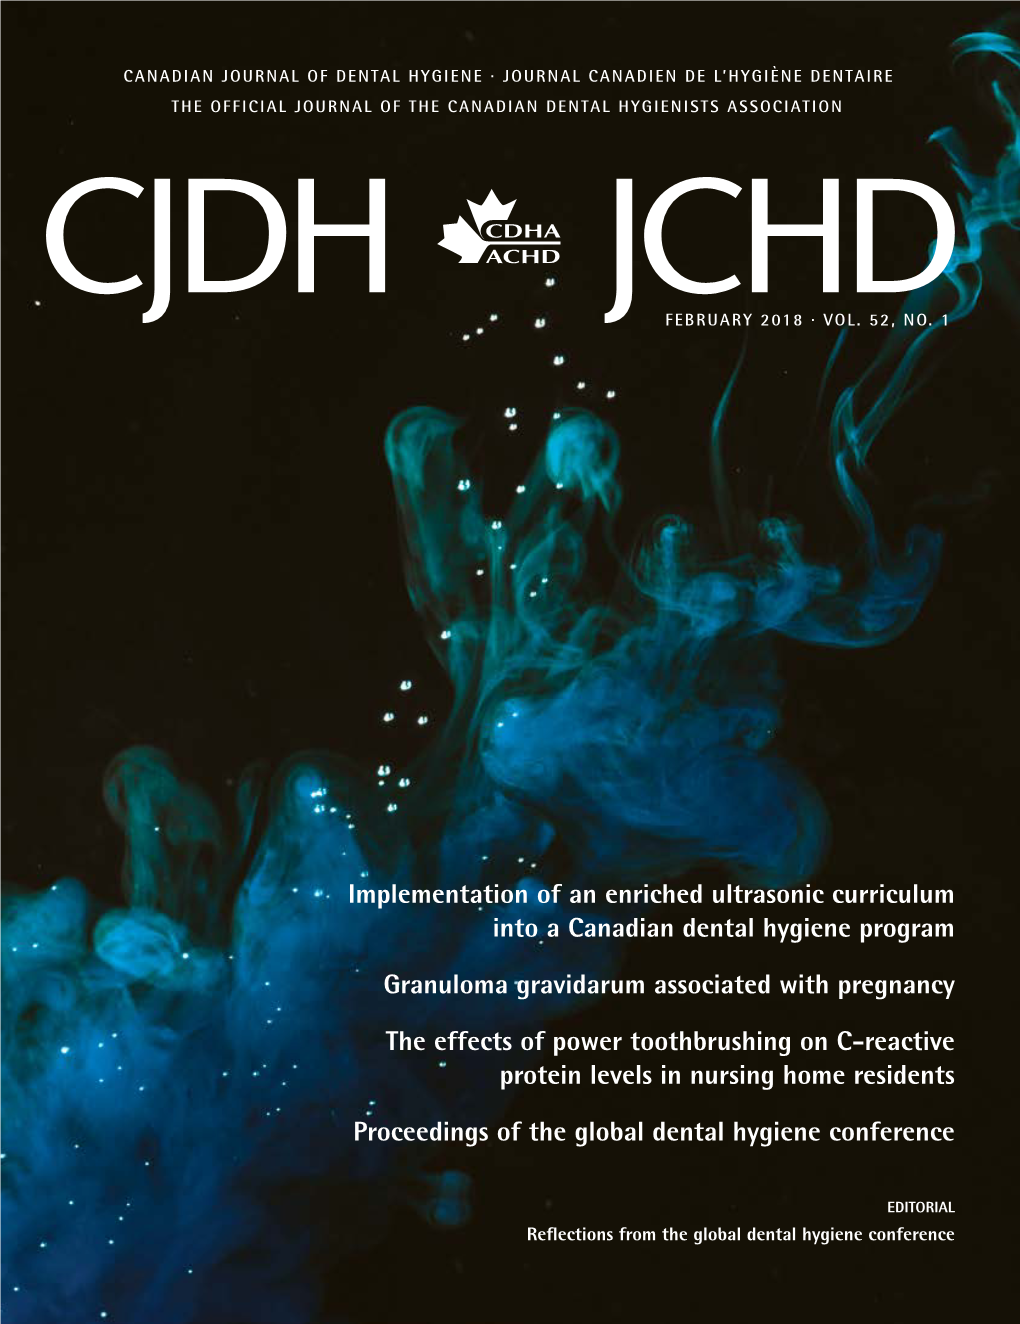 Implementation of an Enriched Ultrasonic Curriculum Into a Canadian Dental Hygiene Program